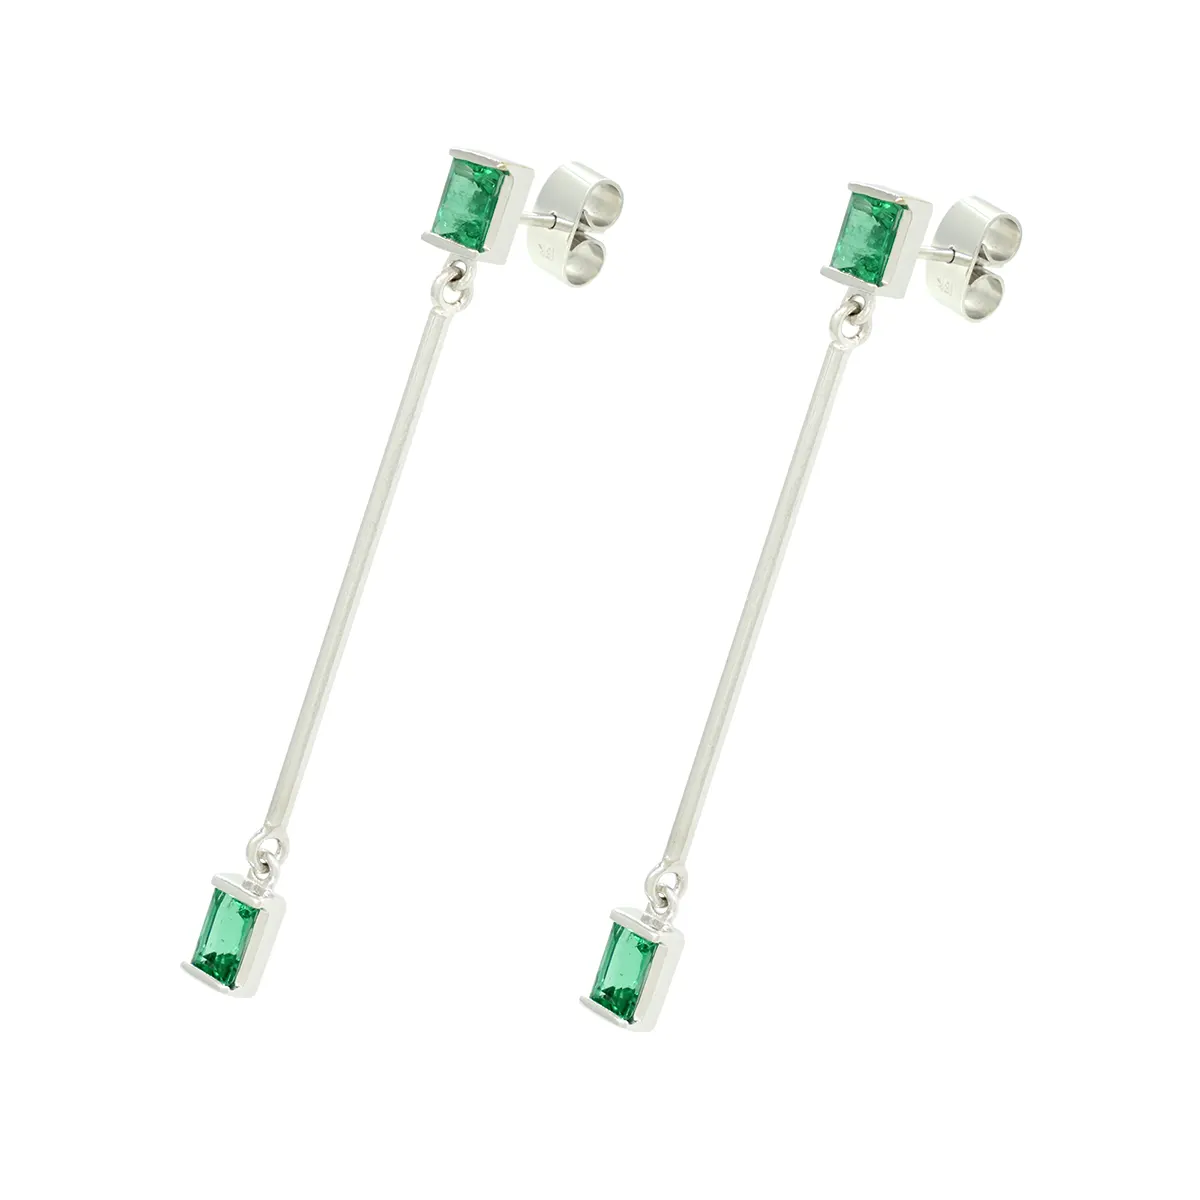 These dangling emerald earrings have a small emerald cut emerald at the top and one of the bottom in half bezel setting joined by a fine long white gold pole on each earring